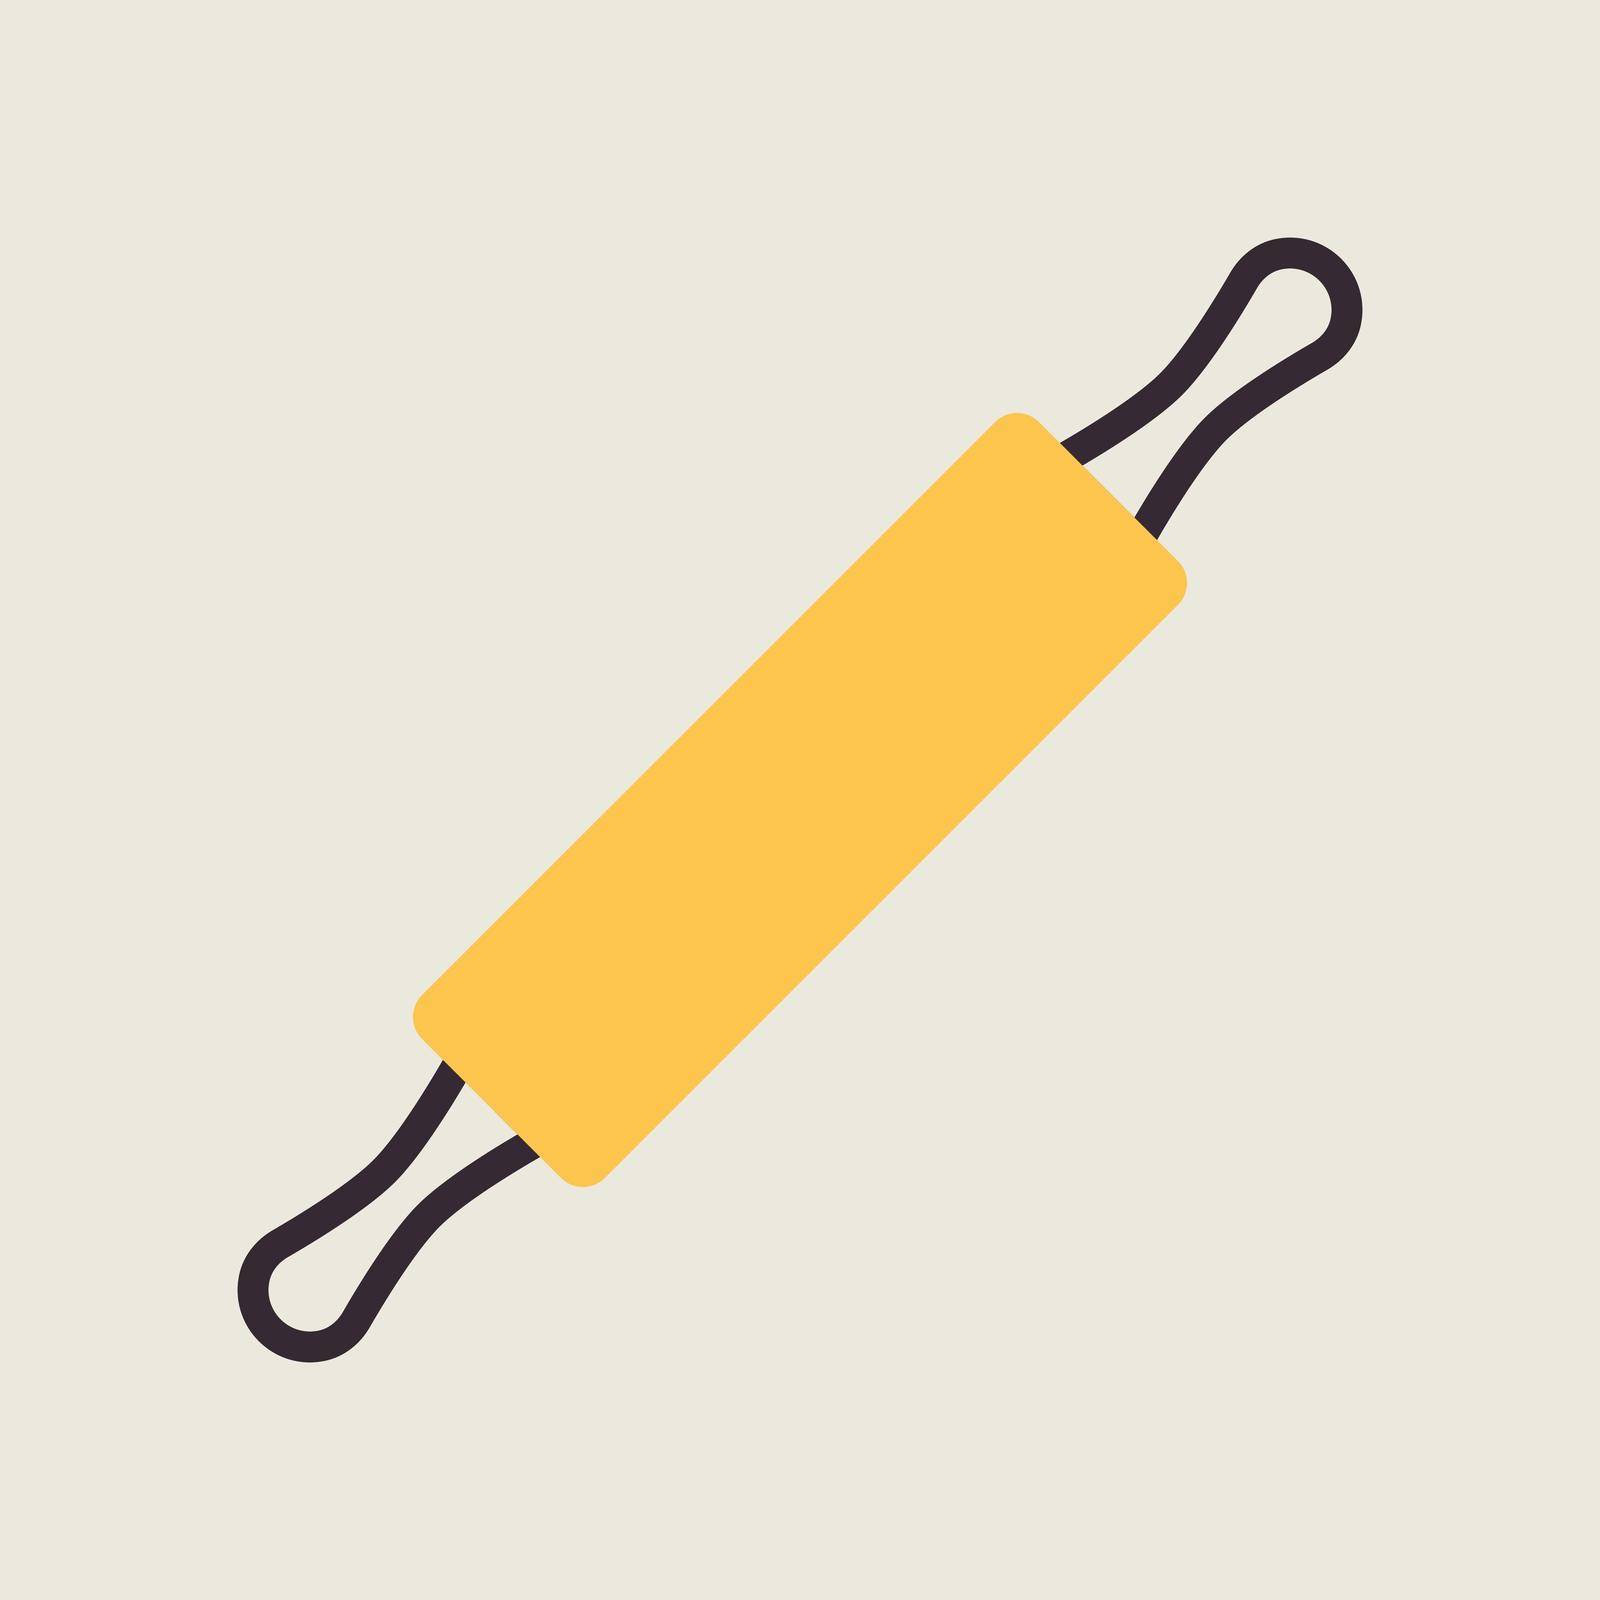 Wooden rolling pin plunger vector icon by nosik